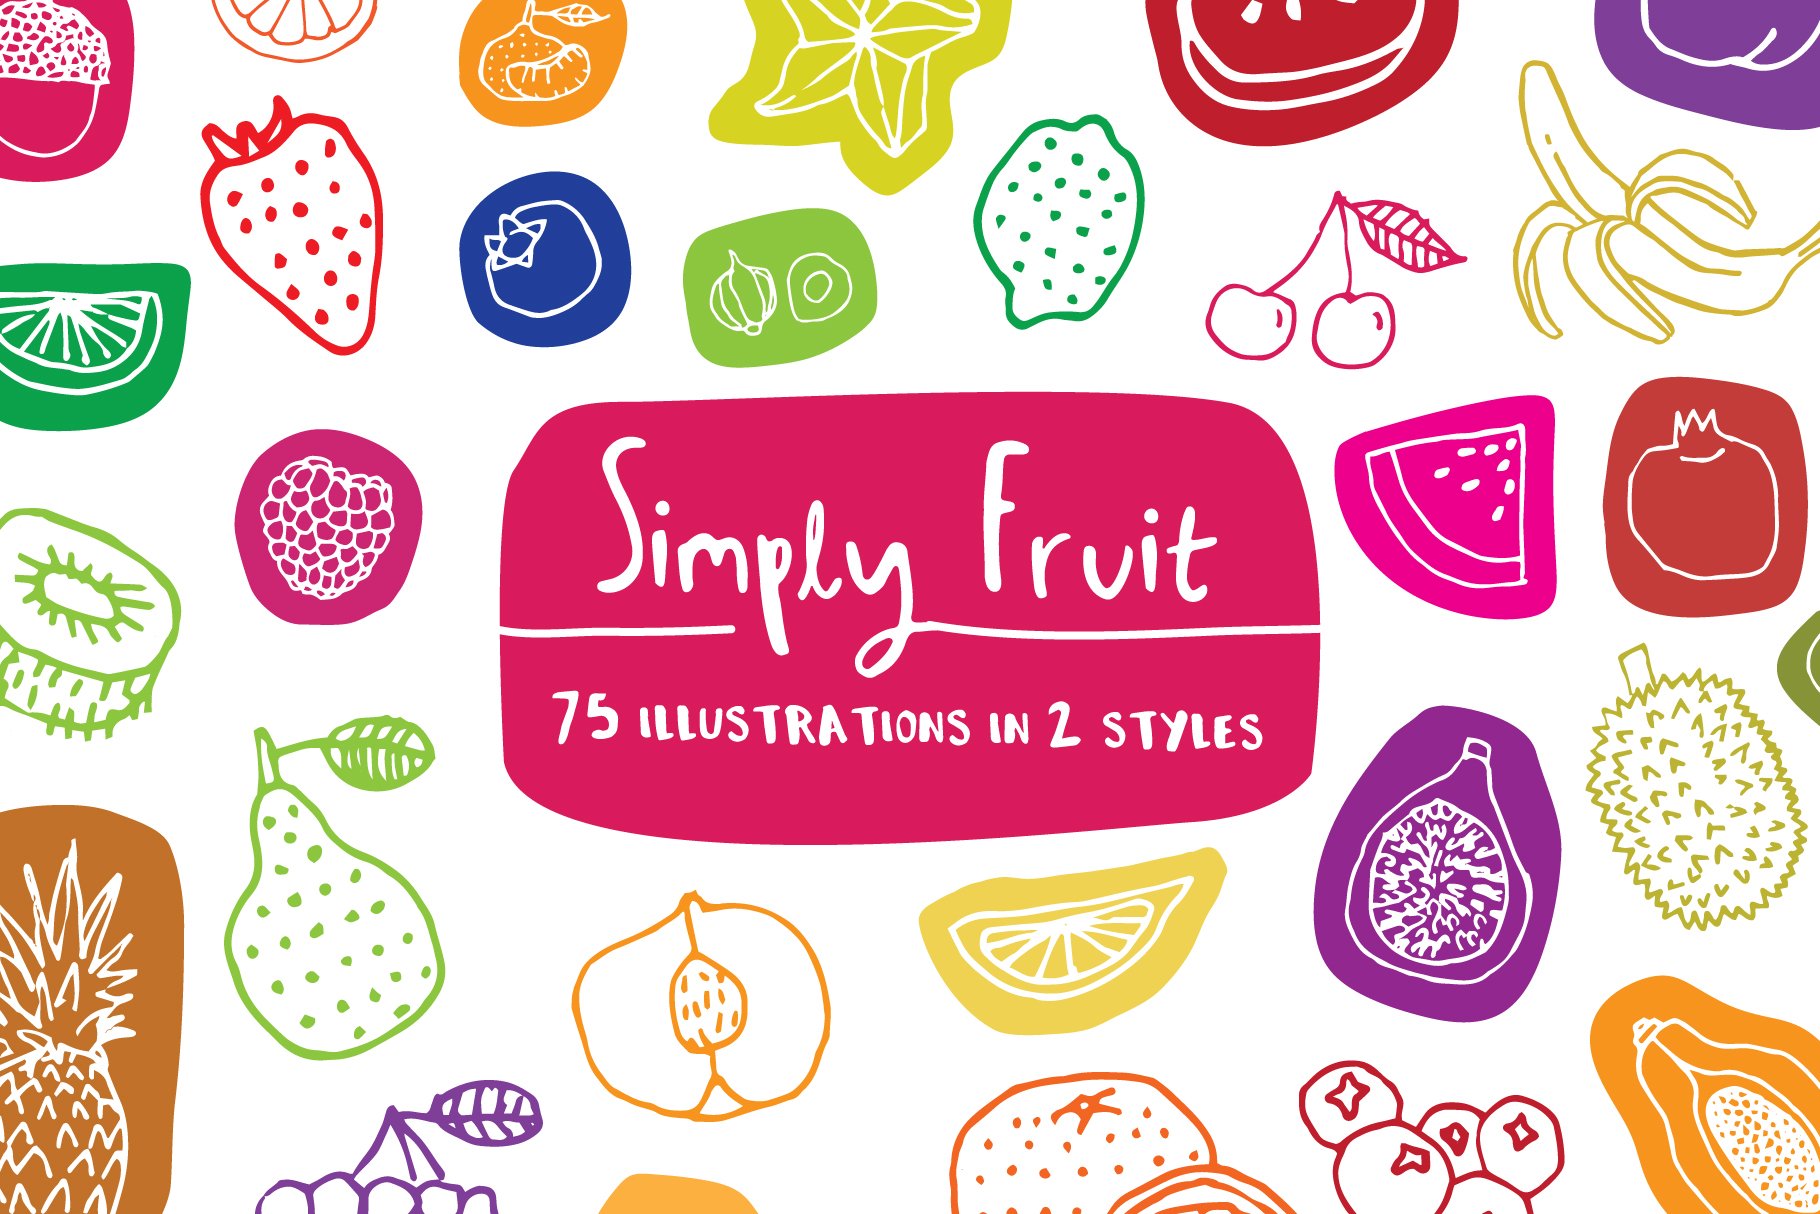 Simply Fruit Illustration Pack cover image.